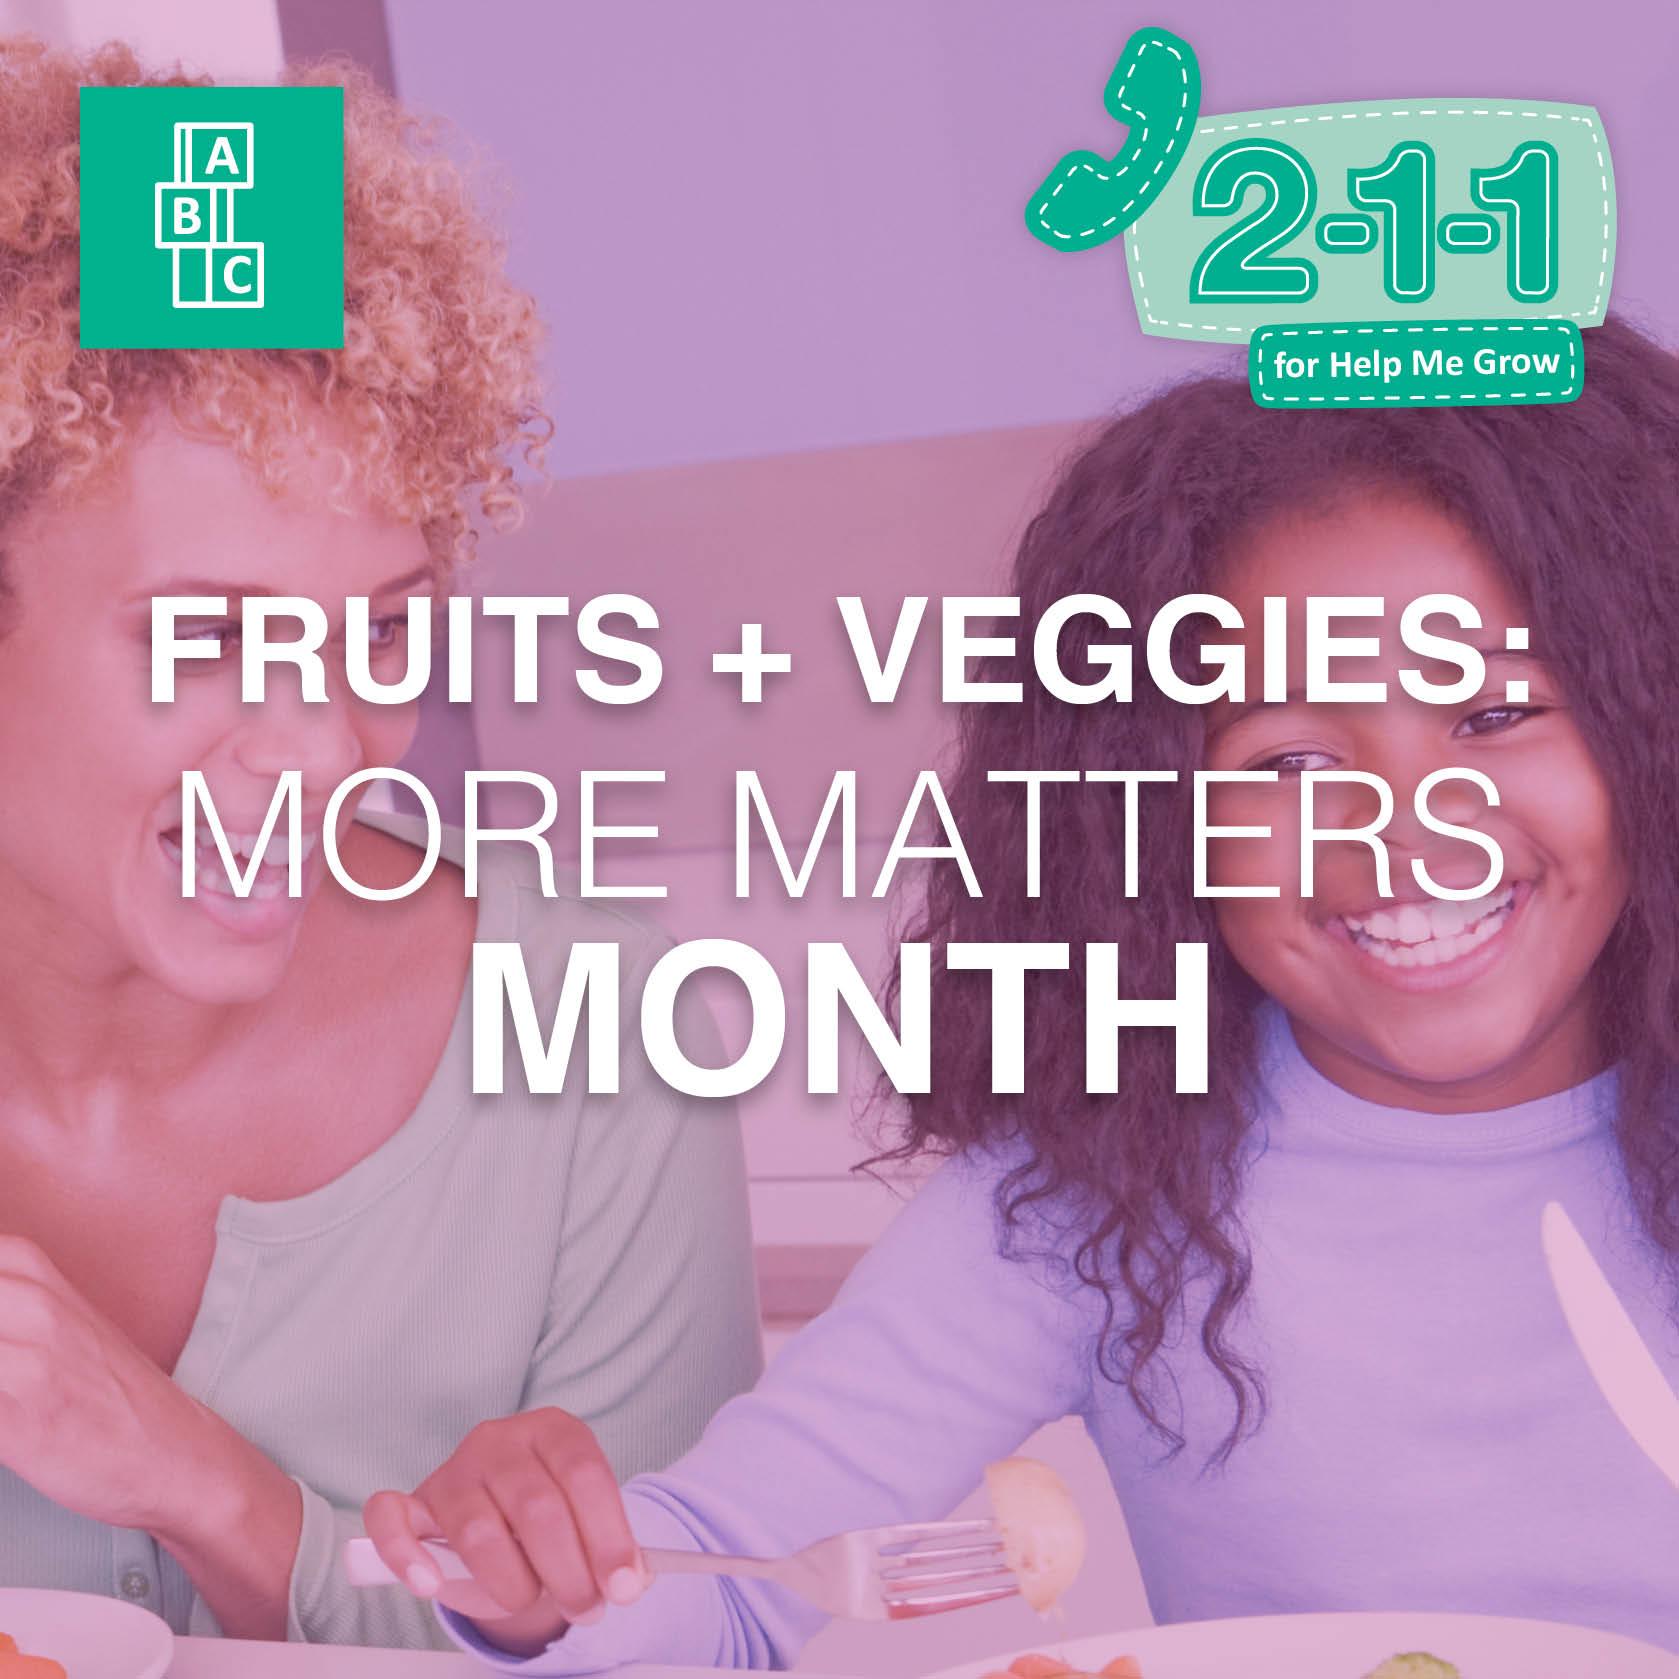 Fruits & Veggies – More Matters Month: How to Sneak Fruits and Veggies into Meals